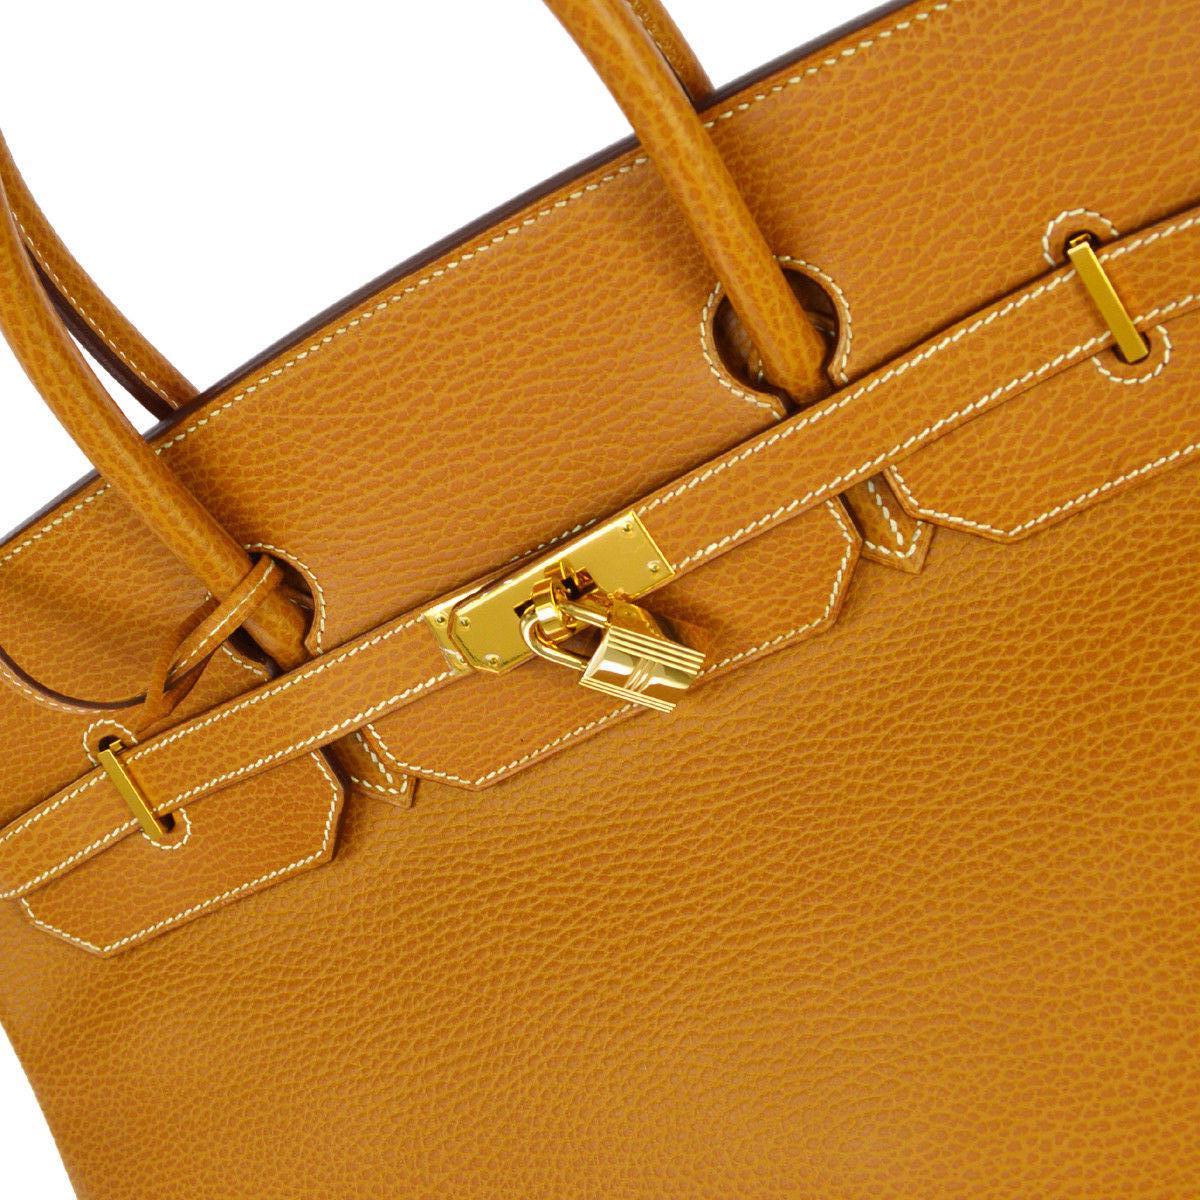 Hermes Birkin 40 Cognac Leather Gold Travel Carryall Top Handle Satchel Tote In Good Condition In Chicago, IL